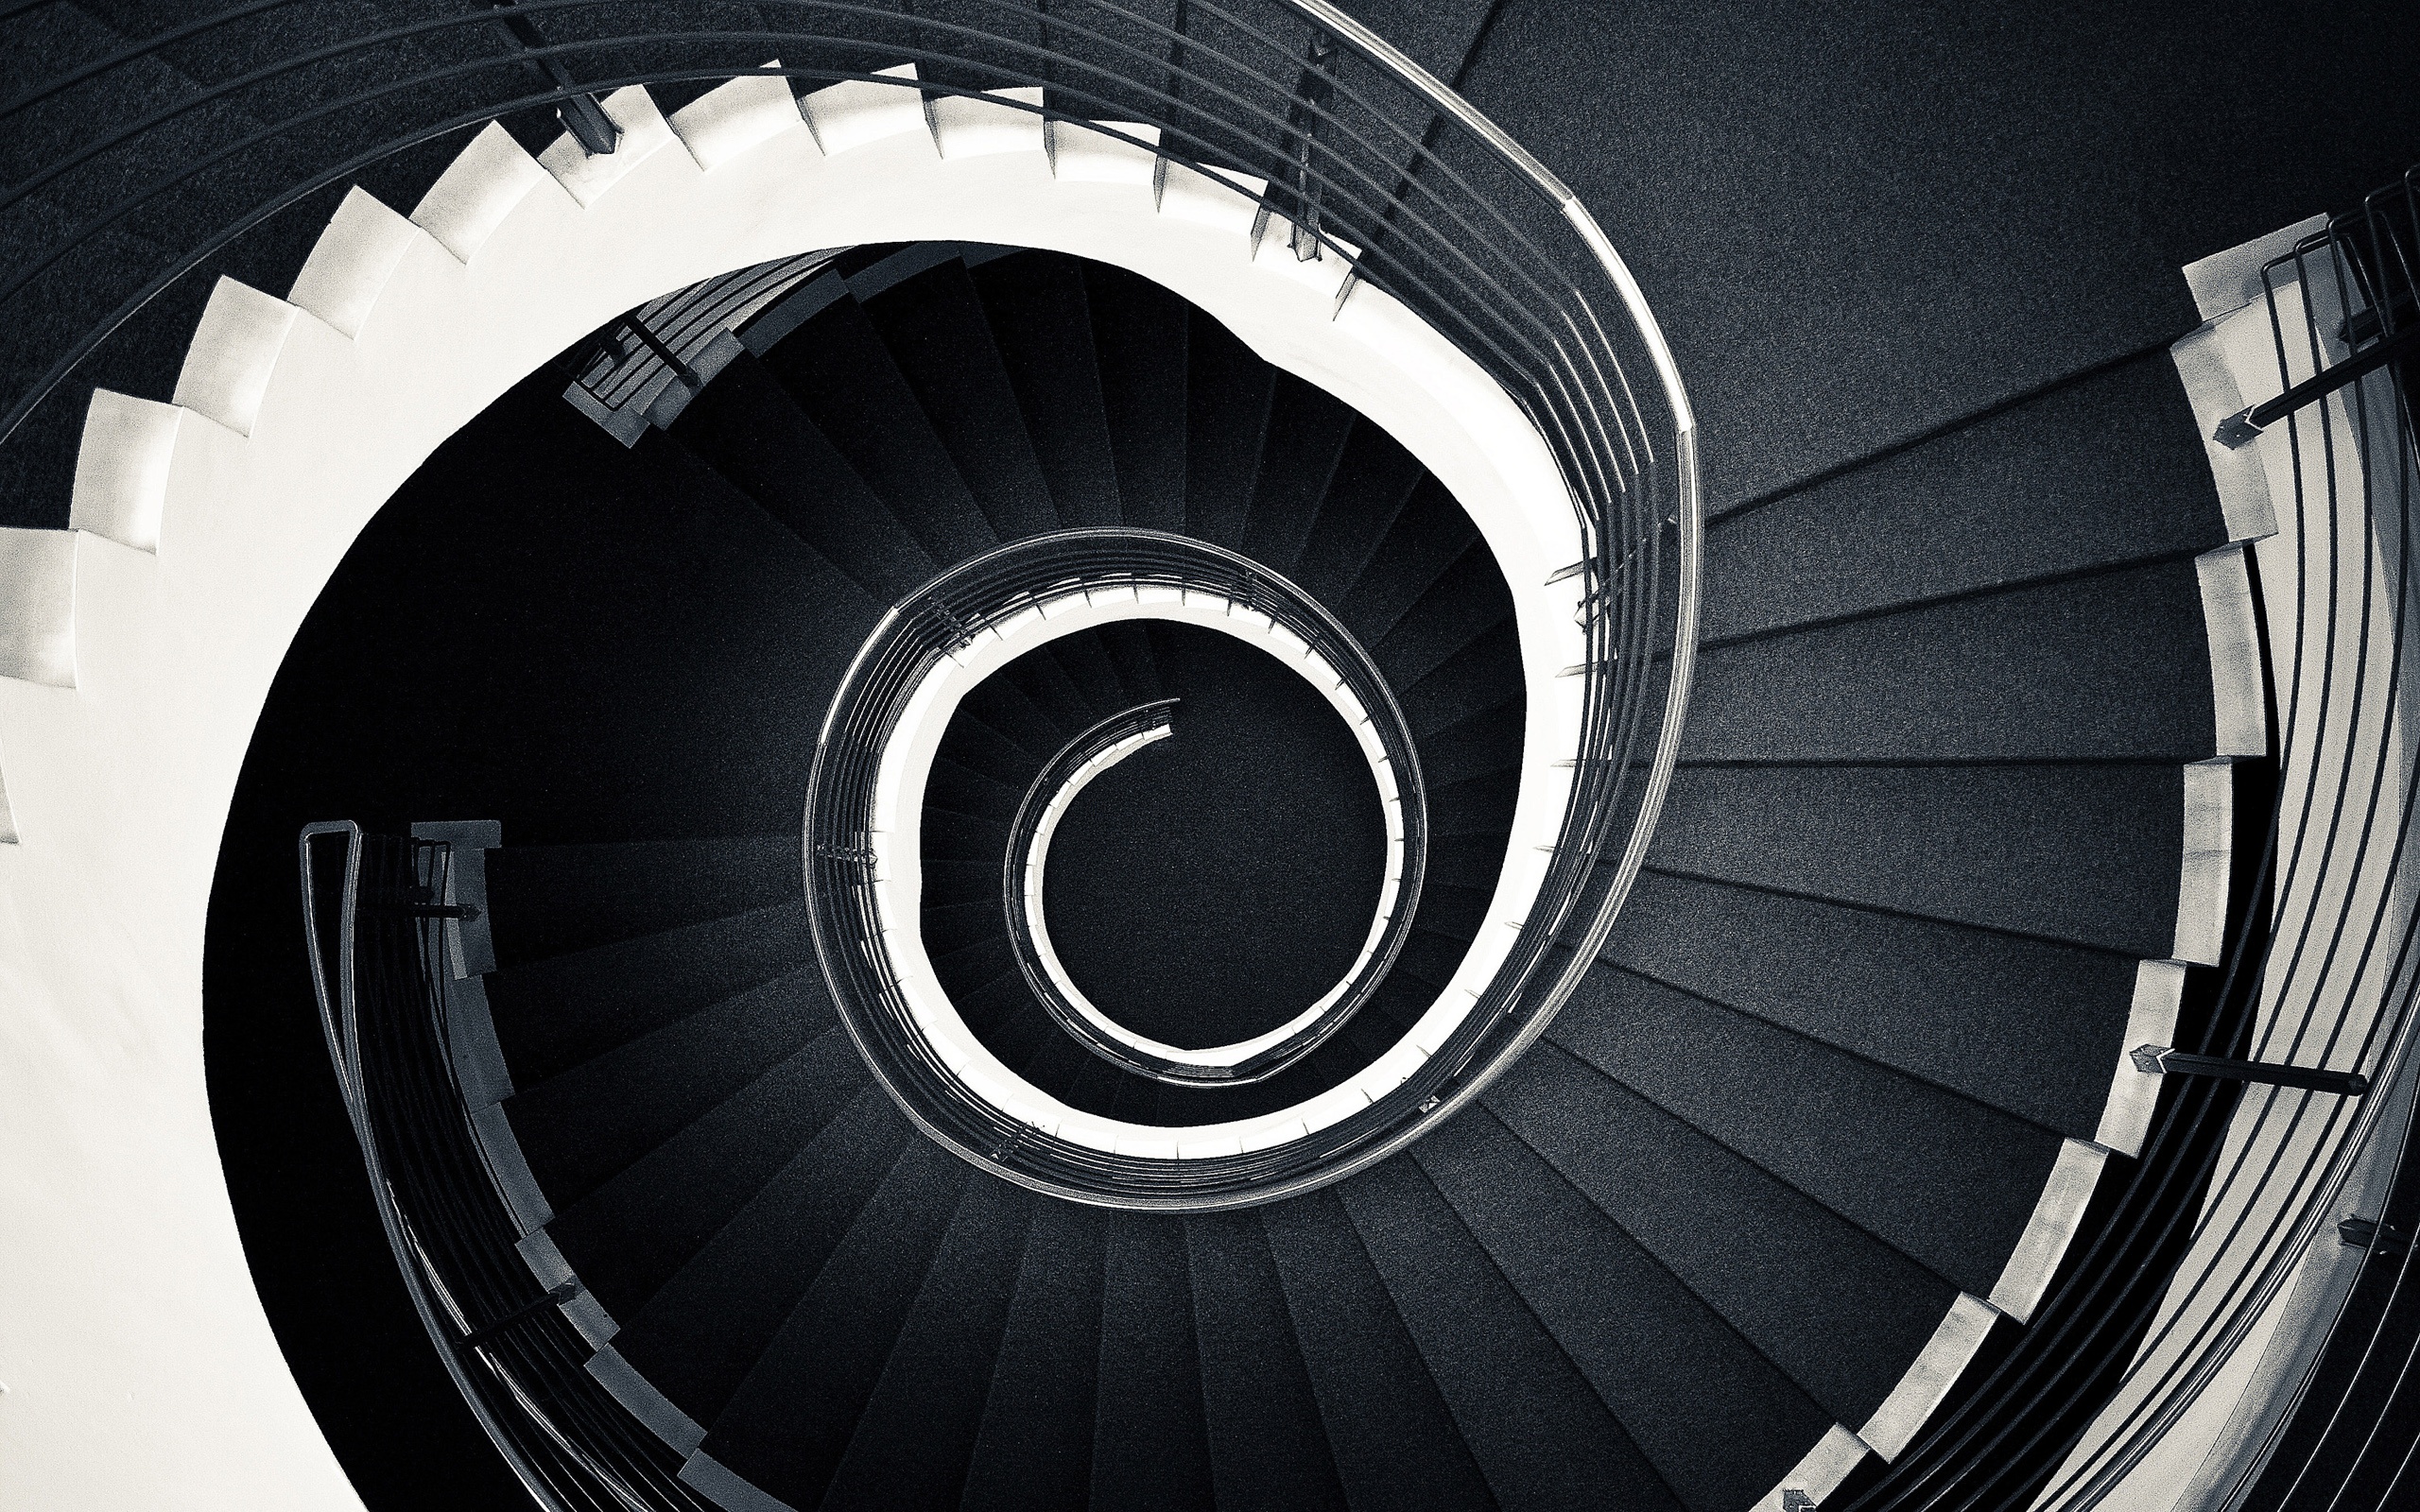 Man Made Stairs HD Wallpaper | Background Image